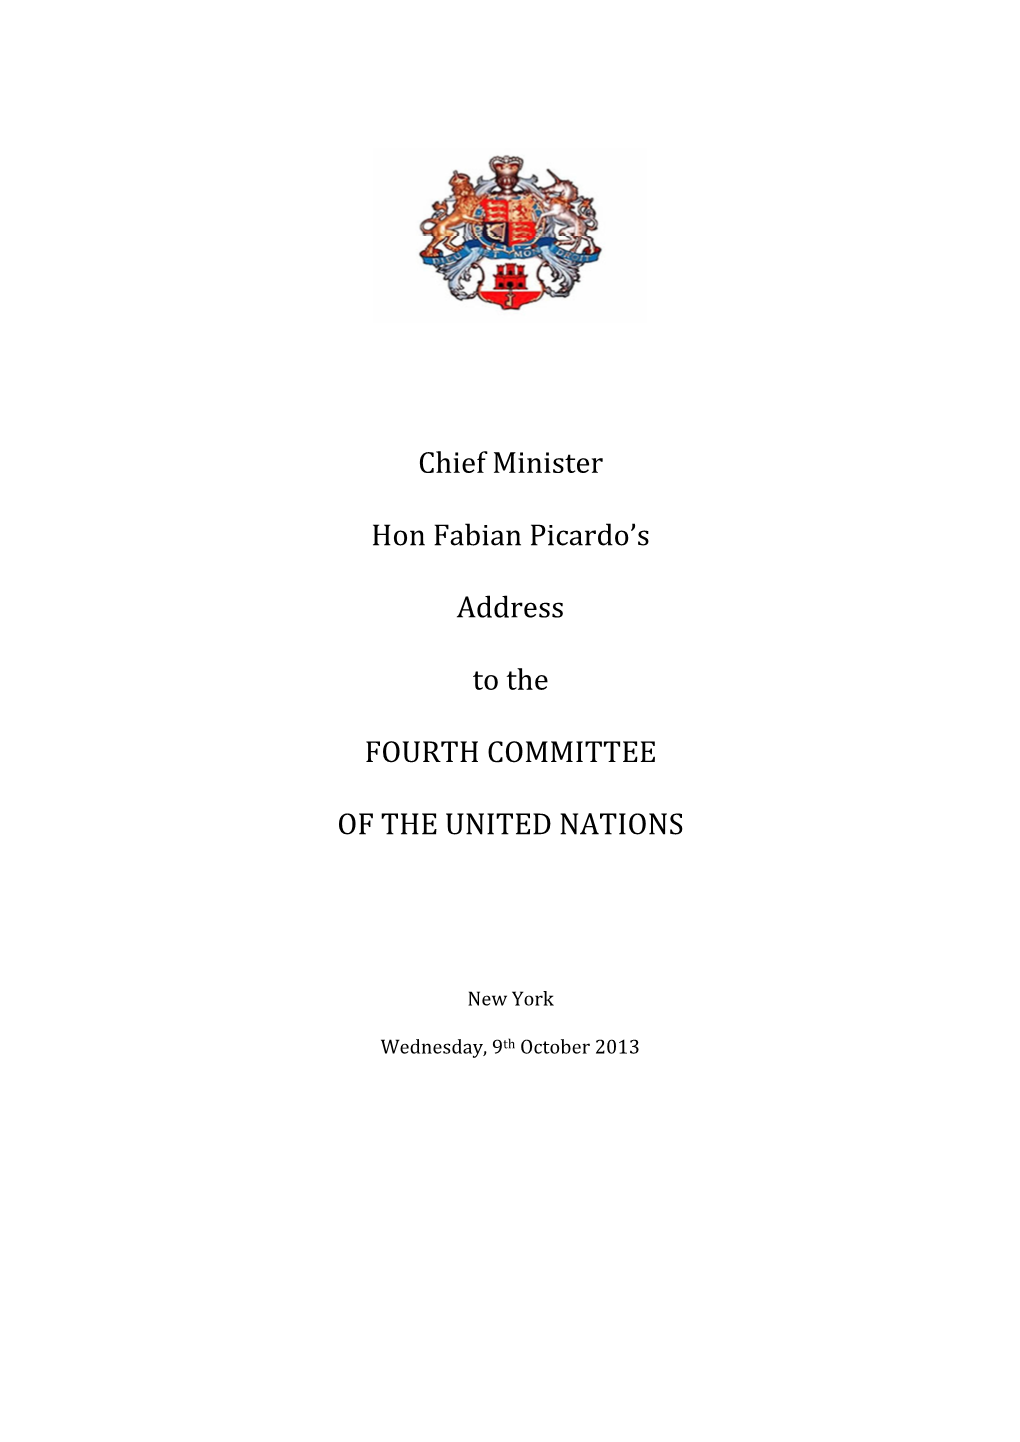 Chief Minister Hon Fabian Picardo's Address to the FOURTH COMMITTEE of the UNITED NATIONS